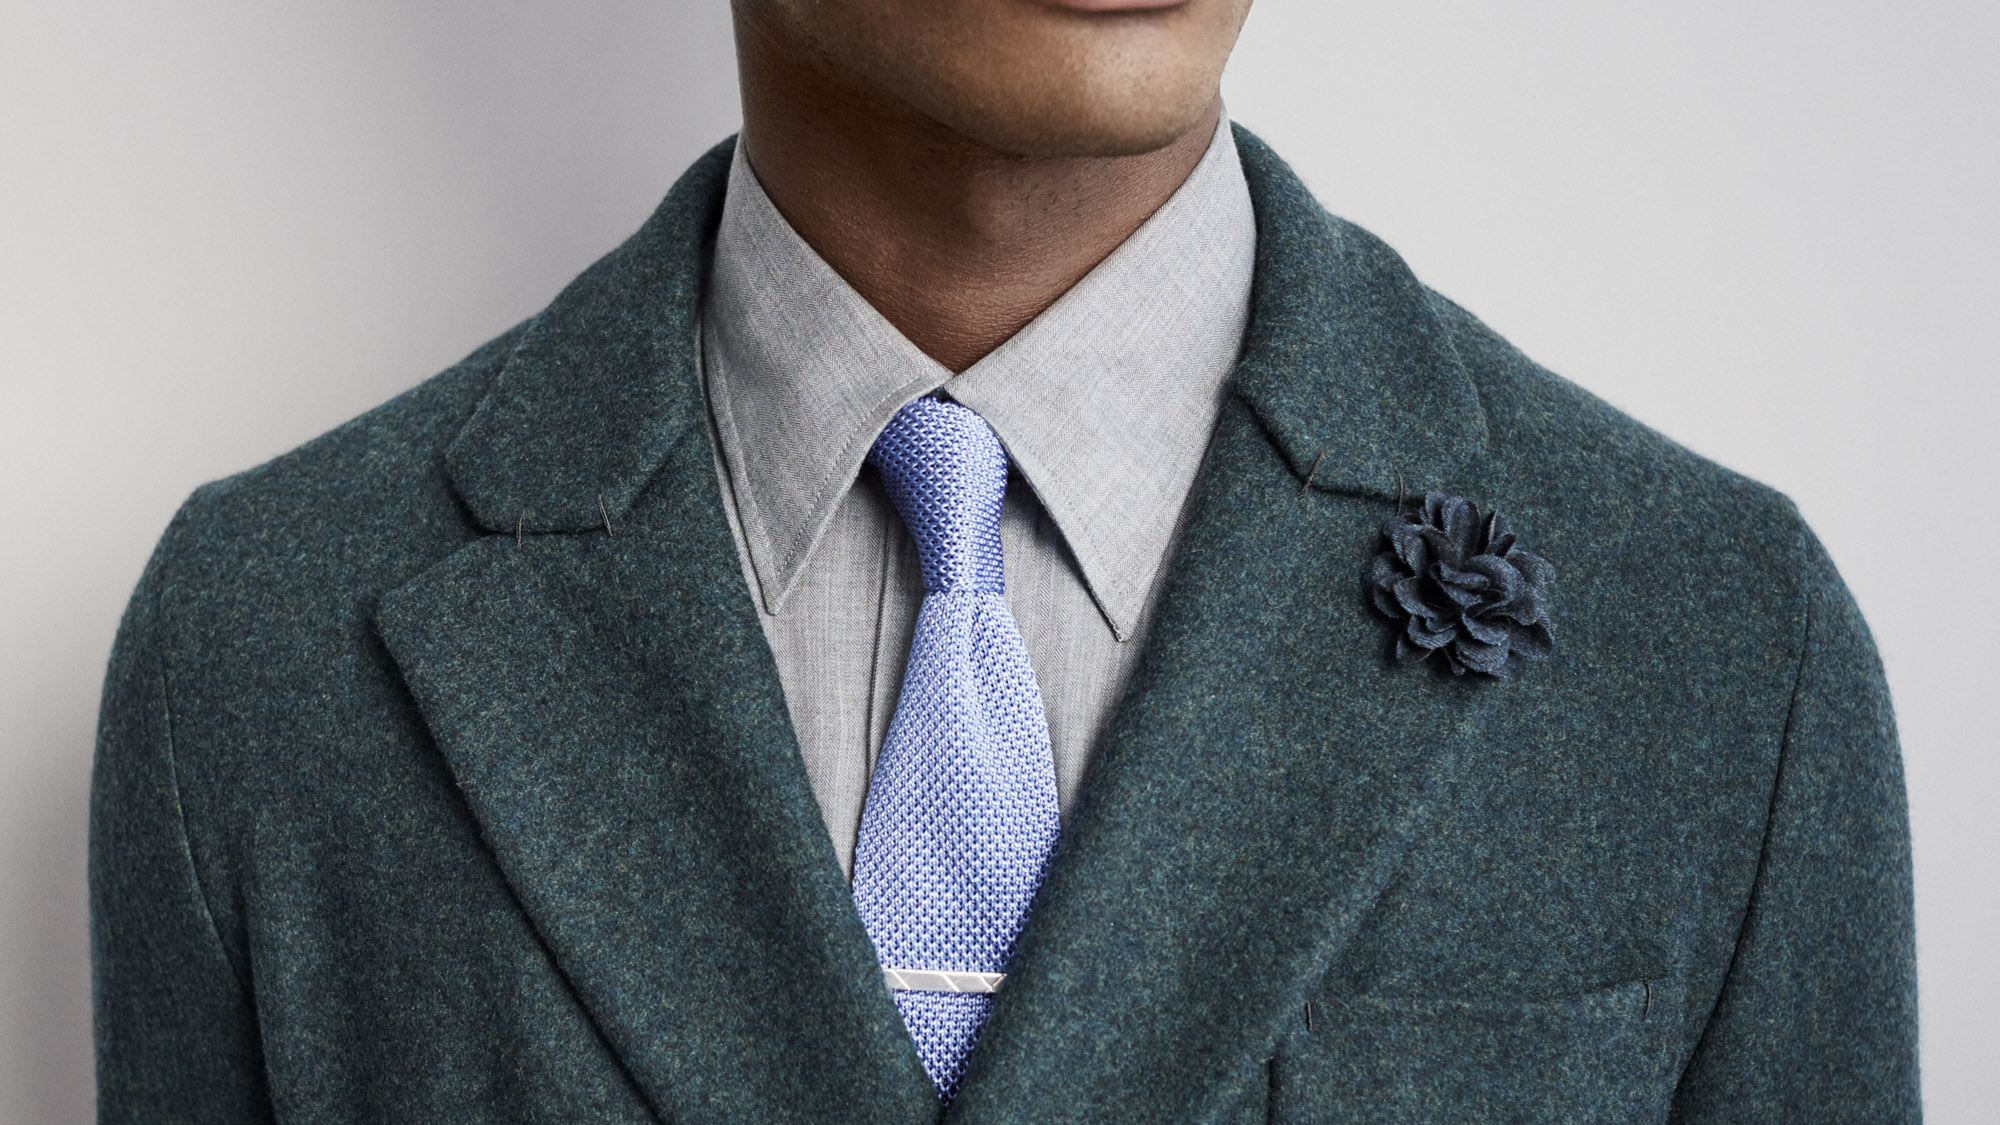 How To Match Your Shirt And Tie | The Journal | MR PORTER